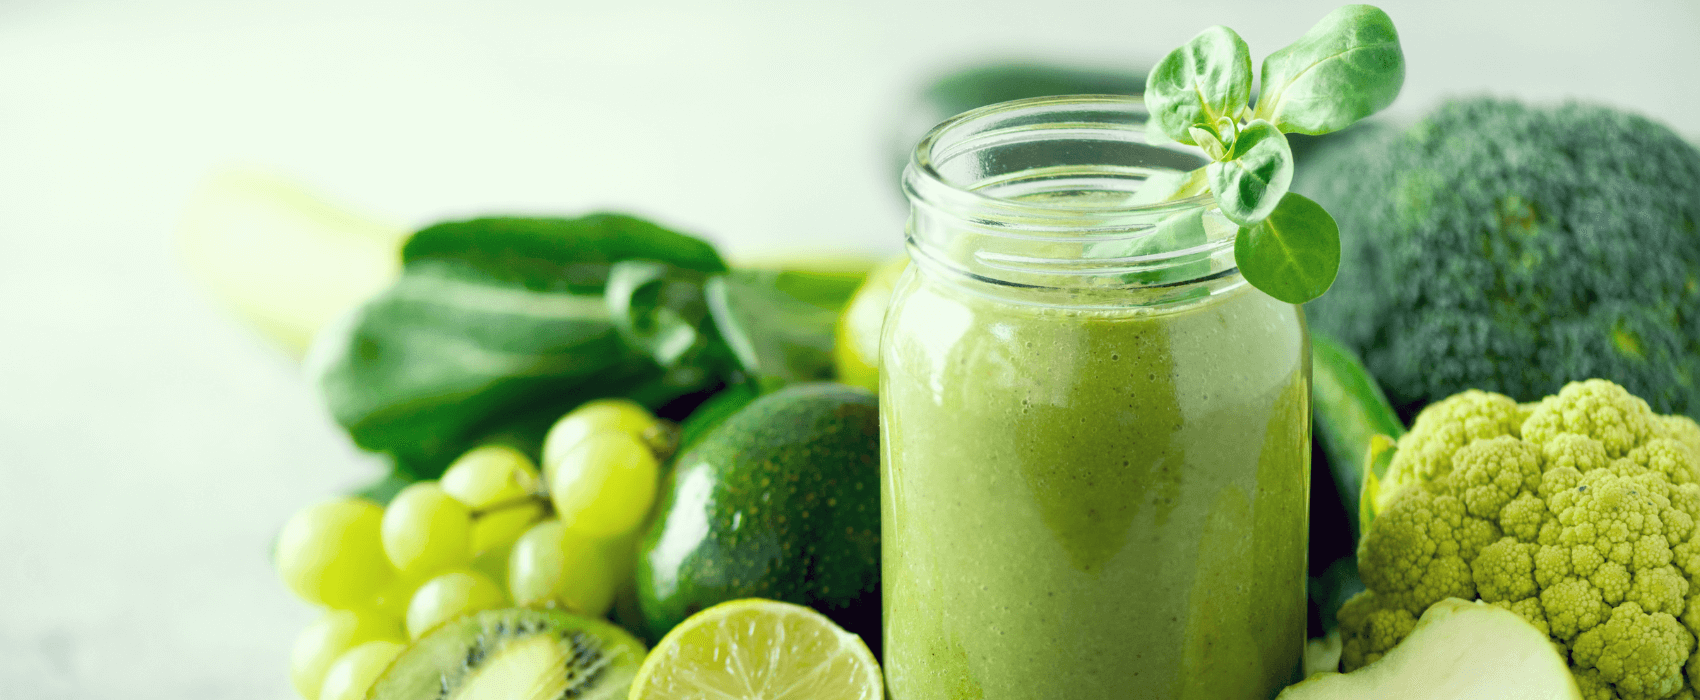 Blog - Boost your health with super greens